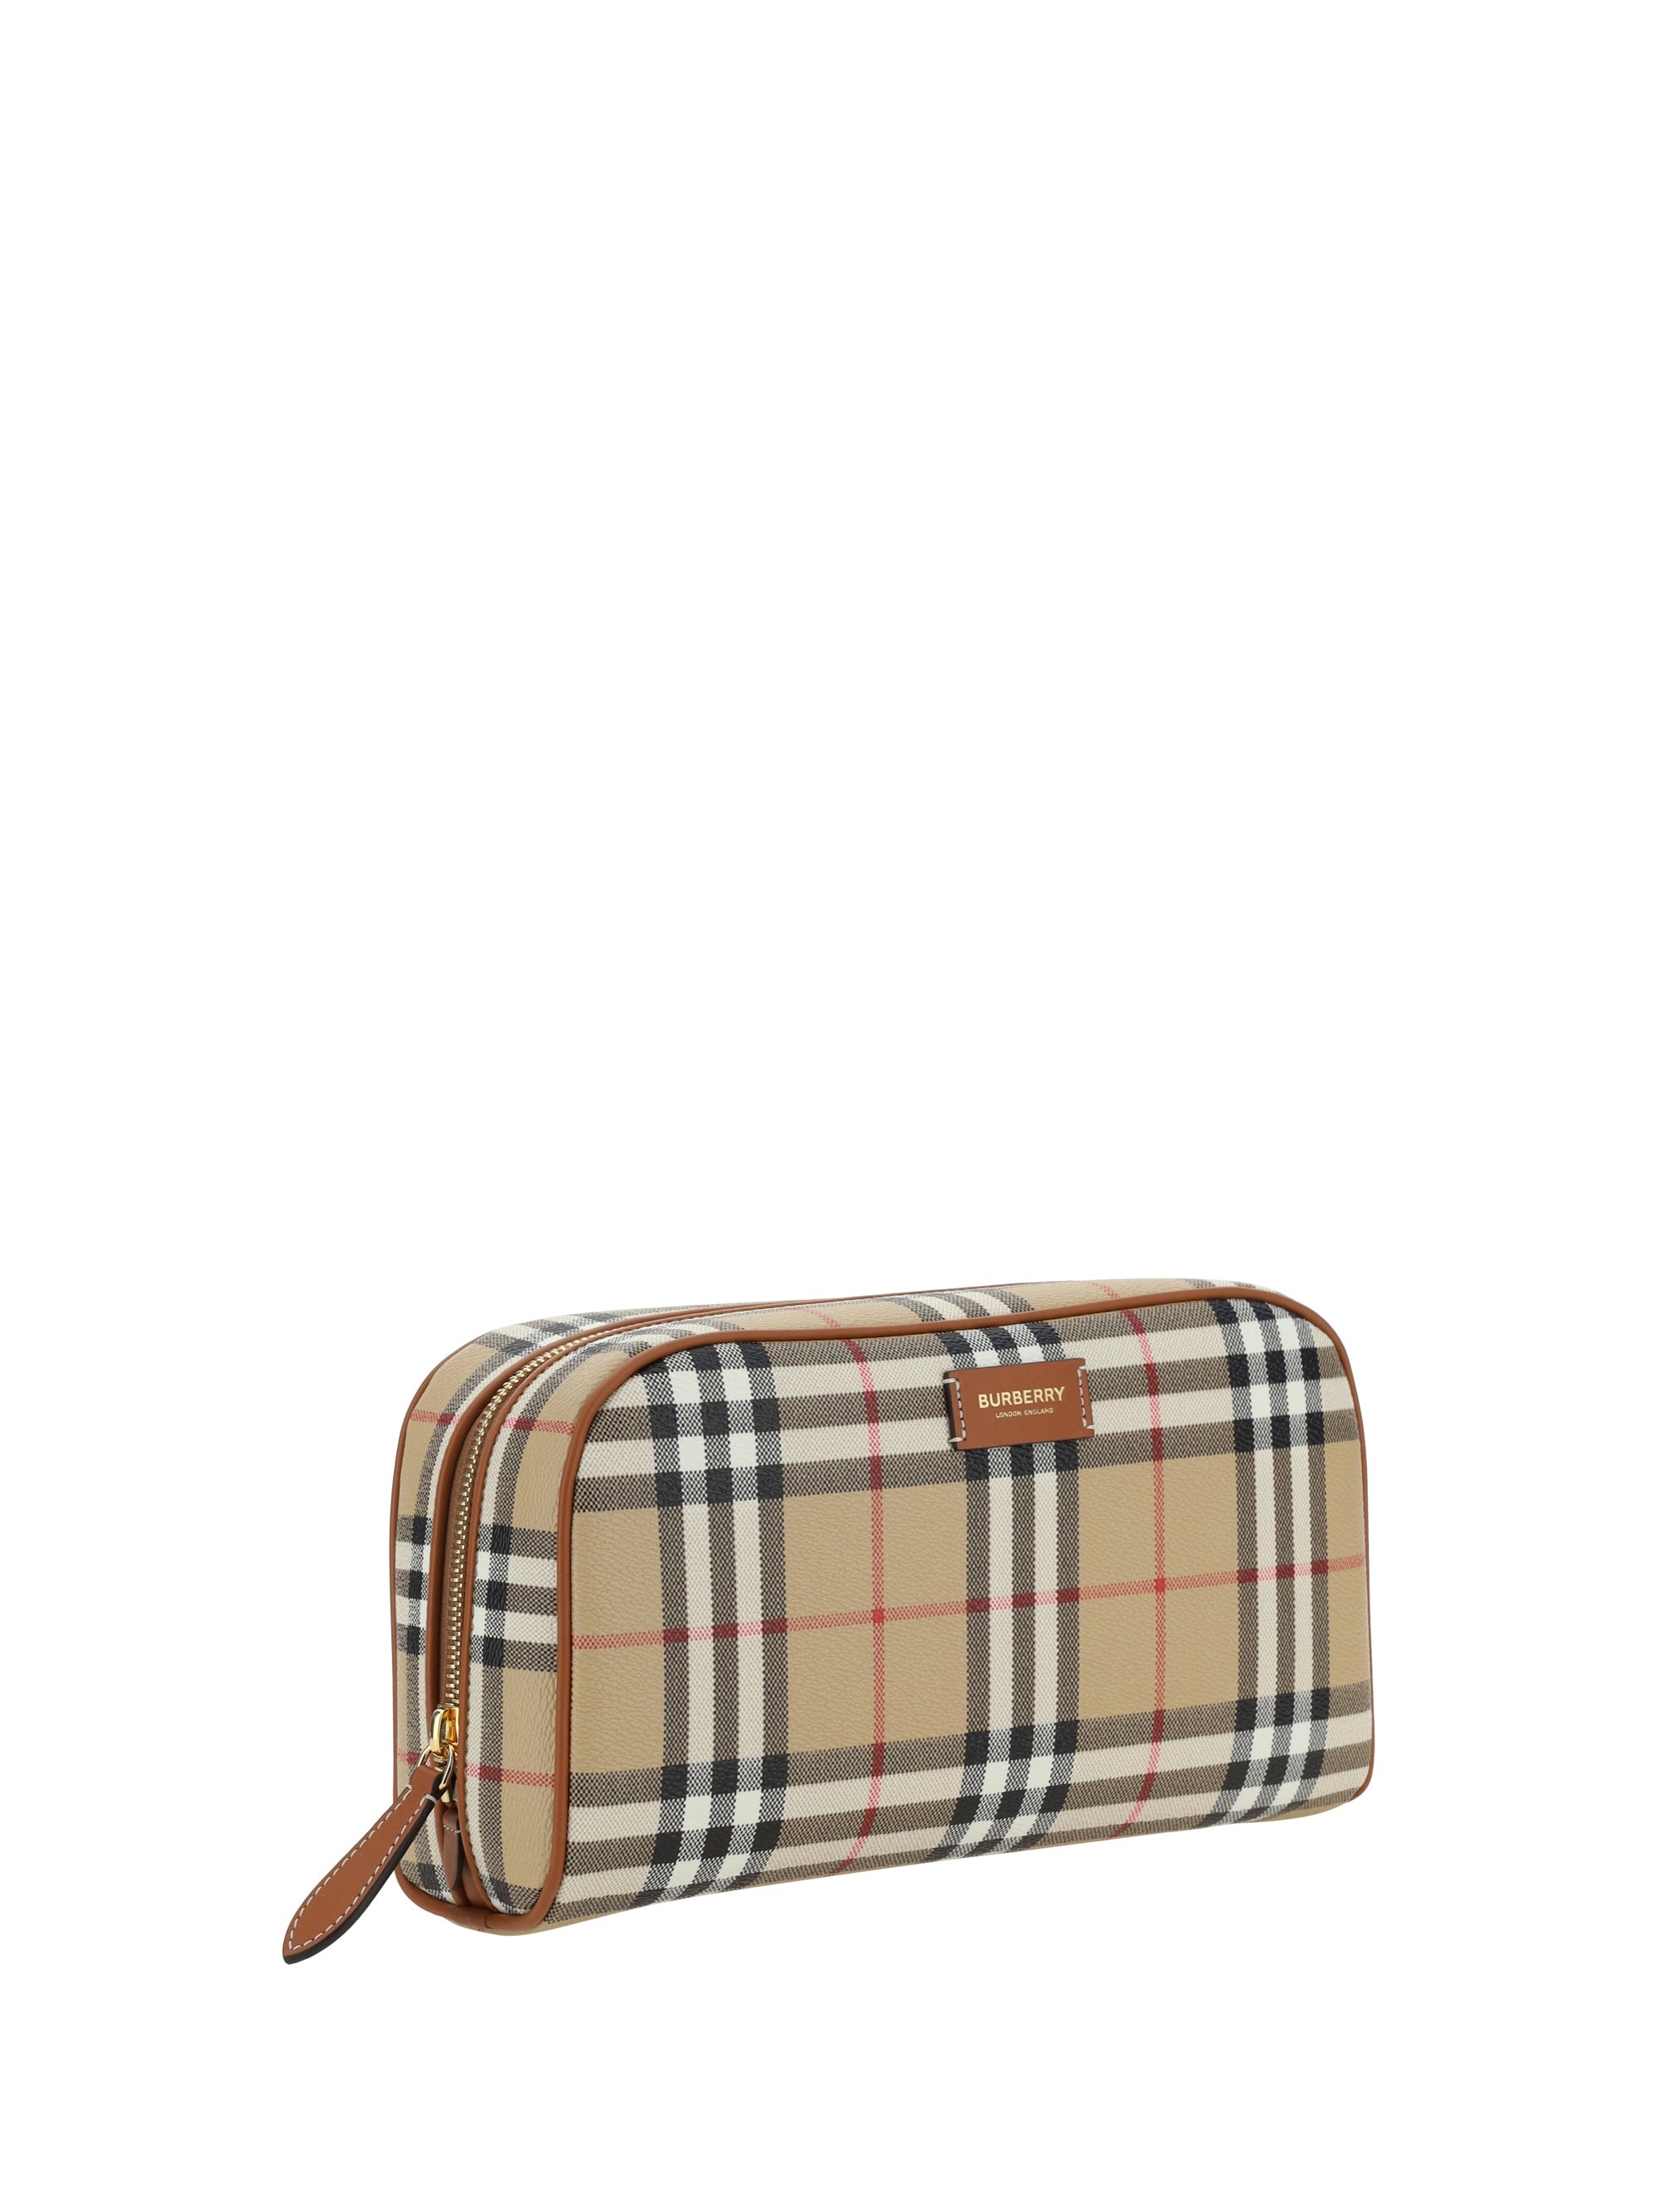 Burberry Women Cosmetic Pouch - 2